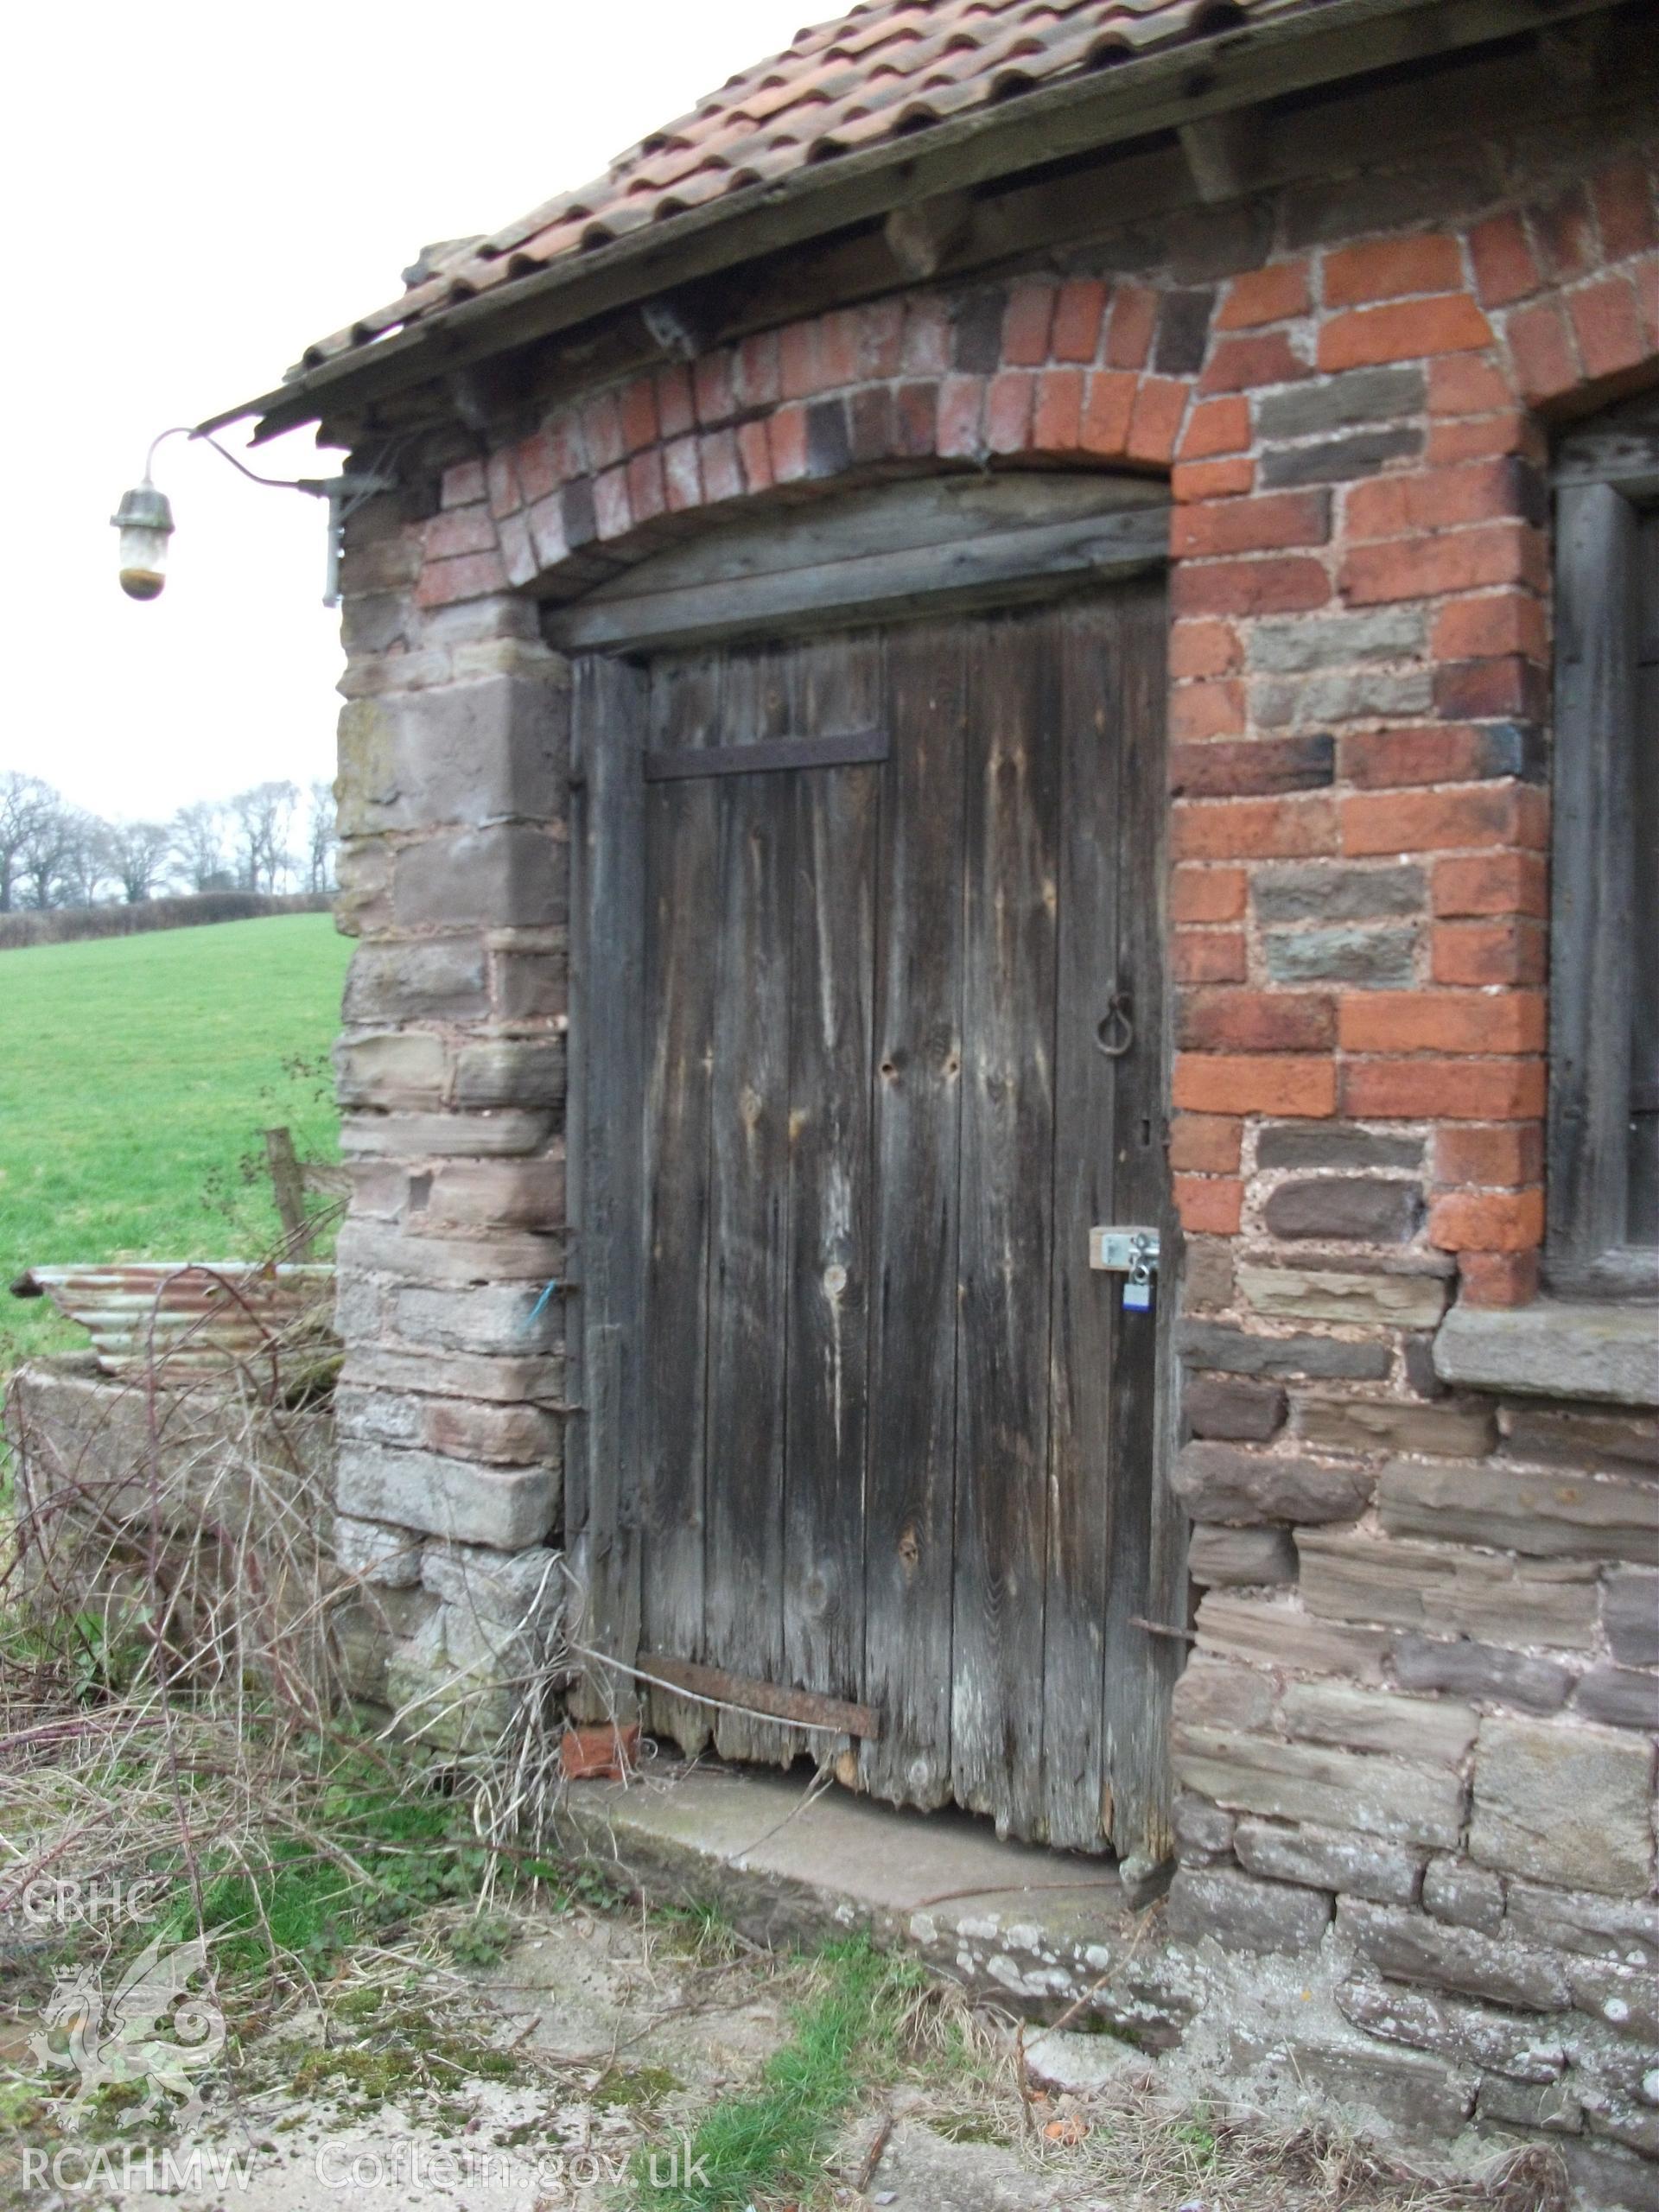 Colour digital photograph of exterior of barn  - entrance; at Llangwm Isaf Farm, received in the course of Emergency Recording case ref no RCS2/1/1599.